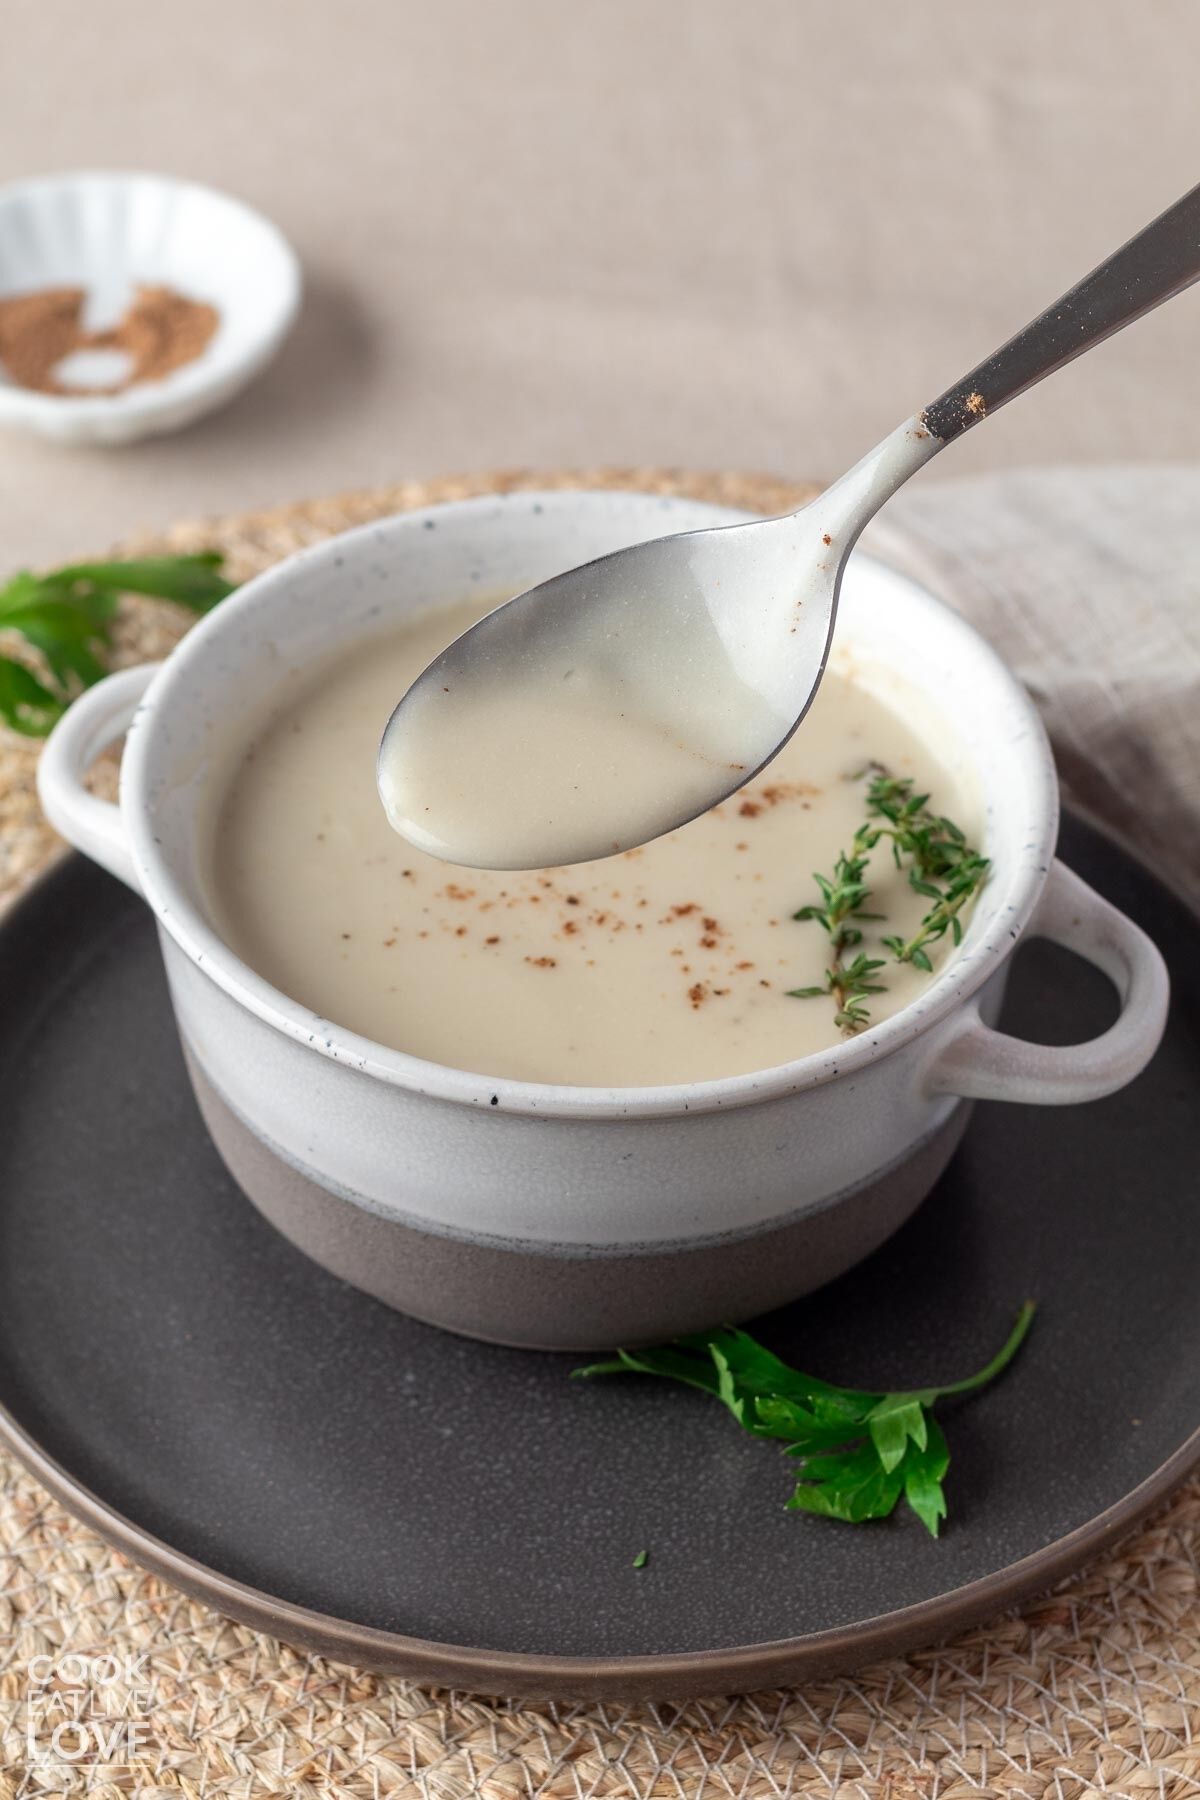 A spoonful of vegan white sauce held up over the bowl and the table to show the texture.